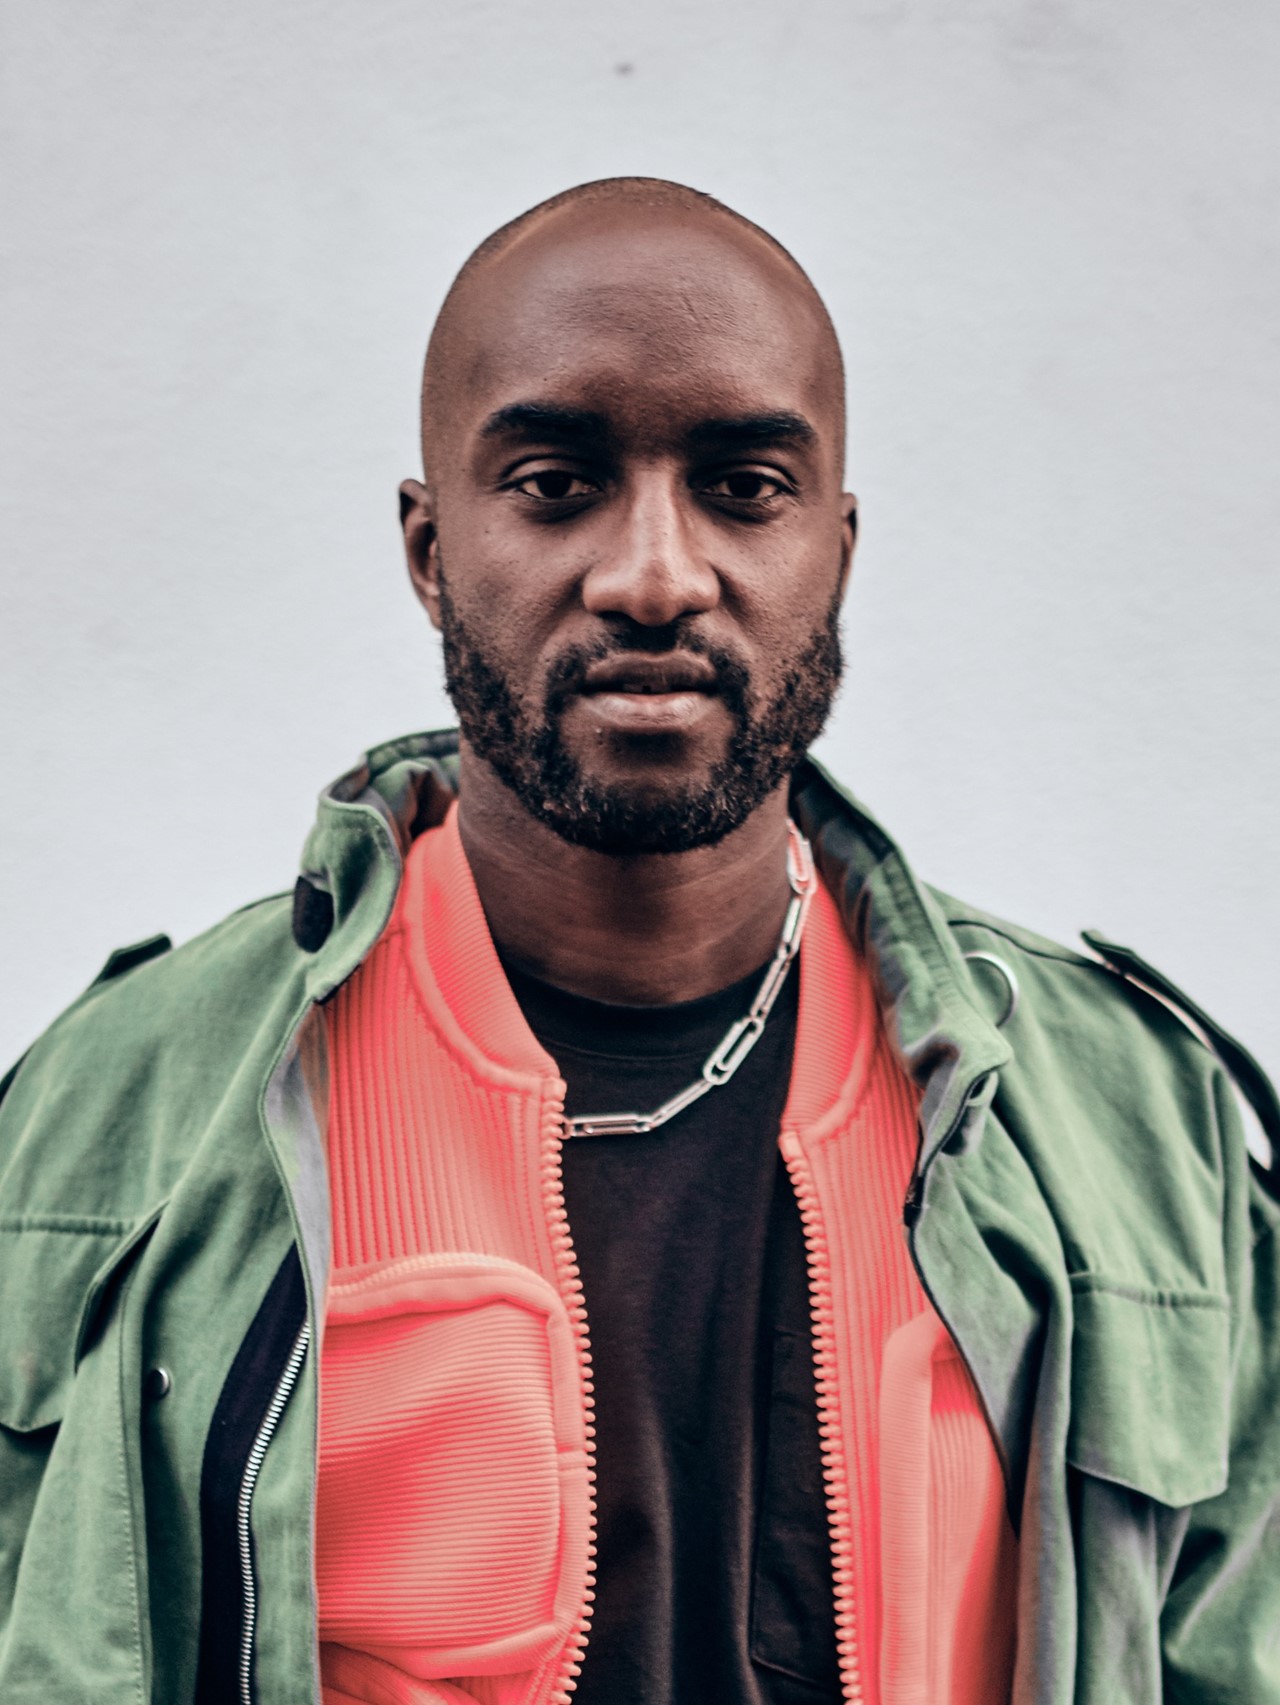 Kanye West leads tributes to Virgil Abloh with moving Sunday